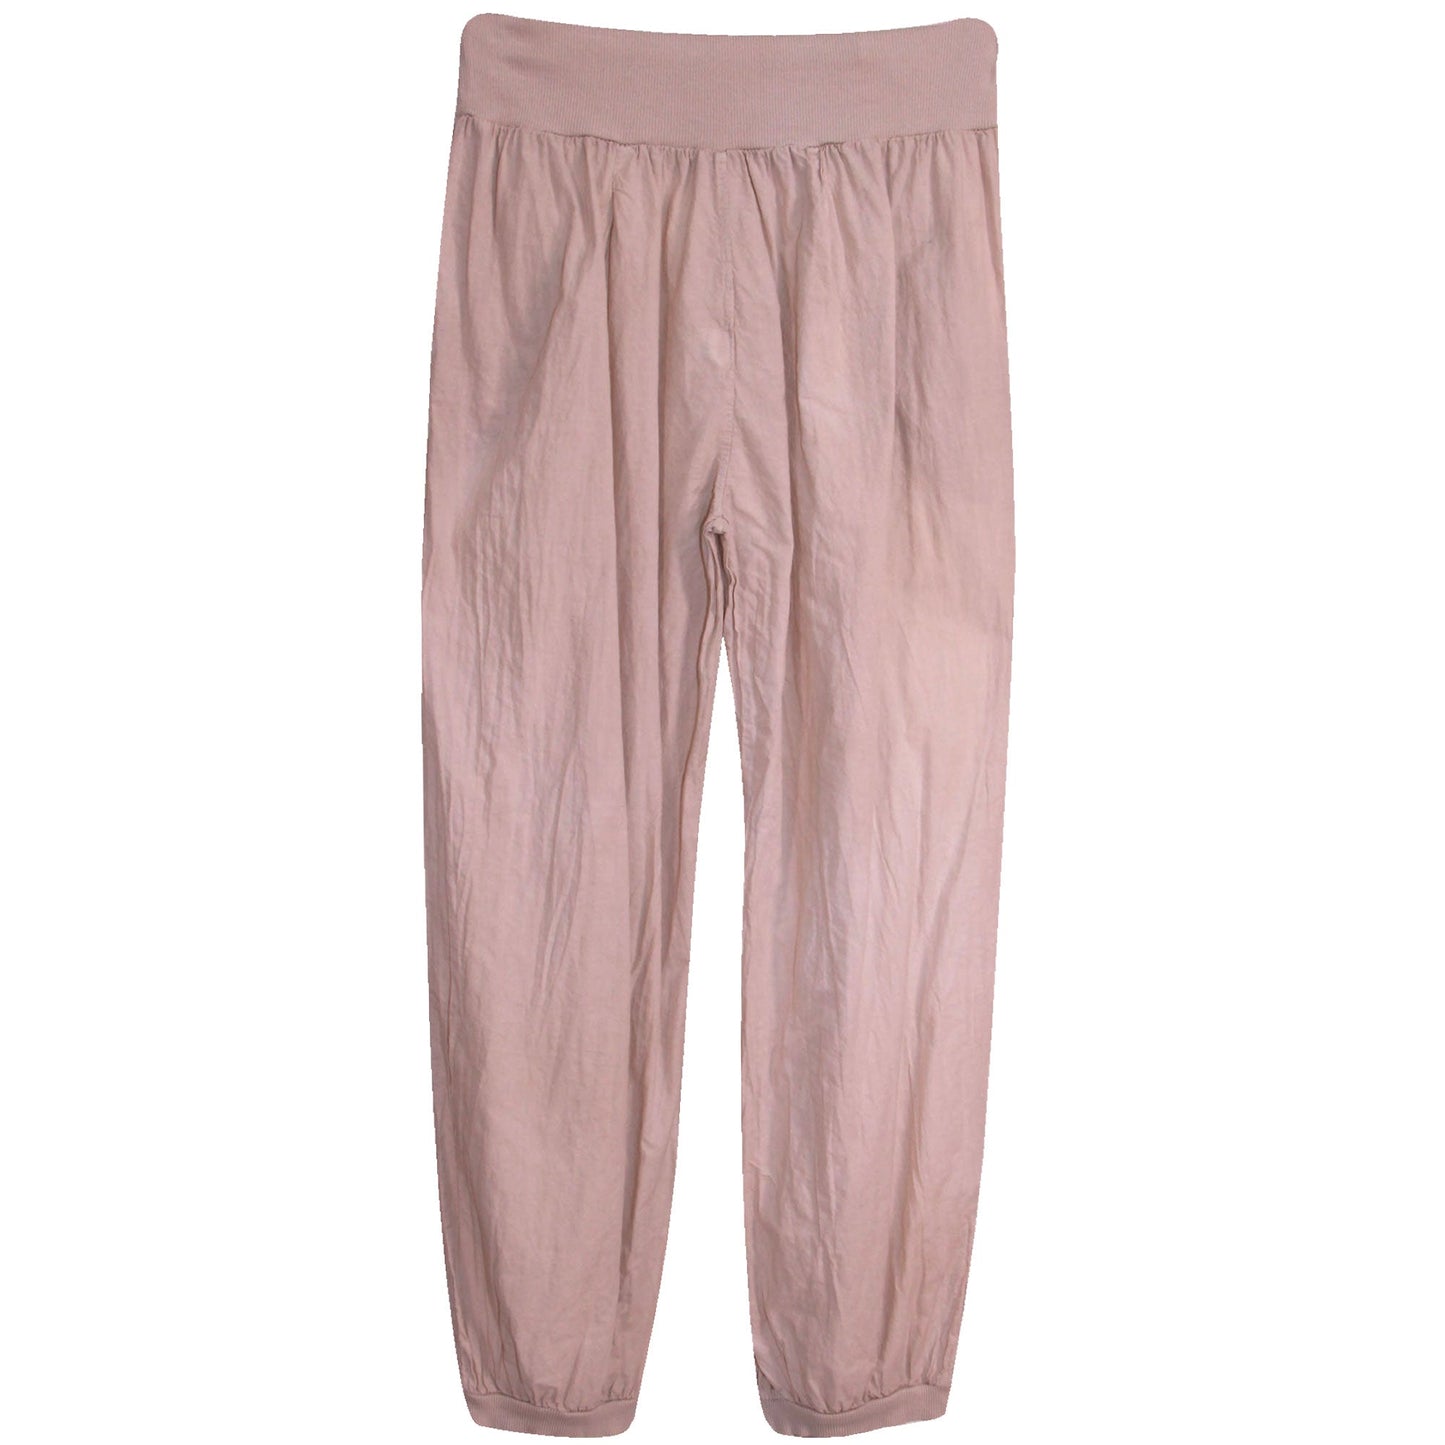 Women's Cotton Hareem Trousers Plus Size : Elasticated Waist with Wood Button Detail